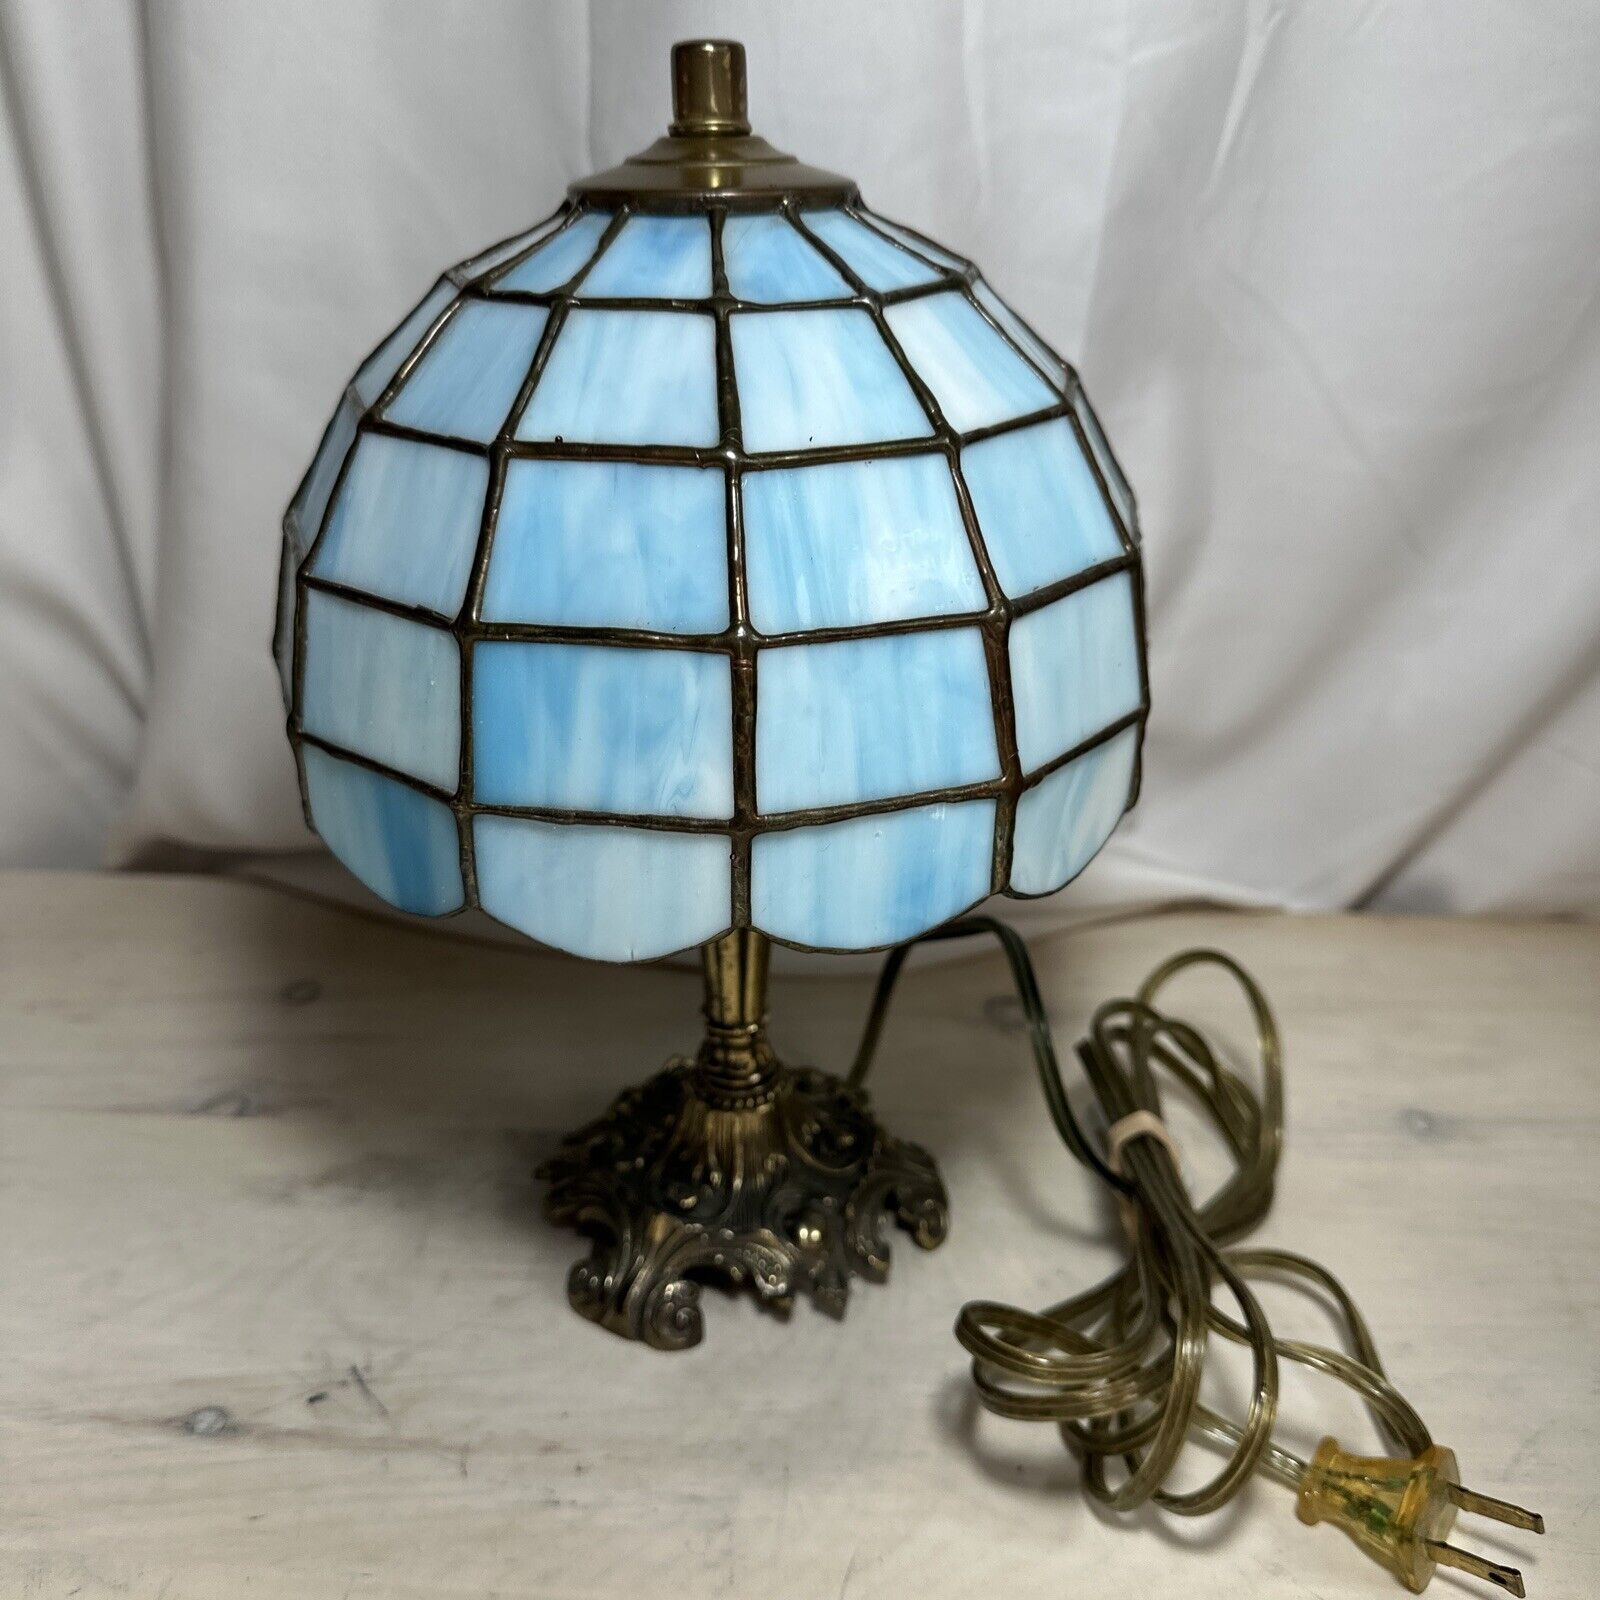 Tiffany Style Table Lamp Blue Tested 7x10.75”T Plug In